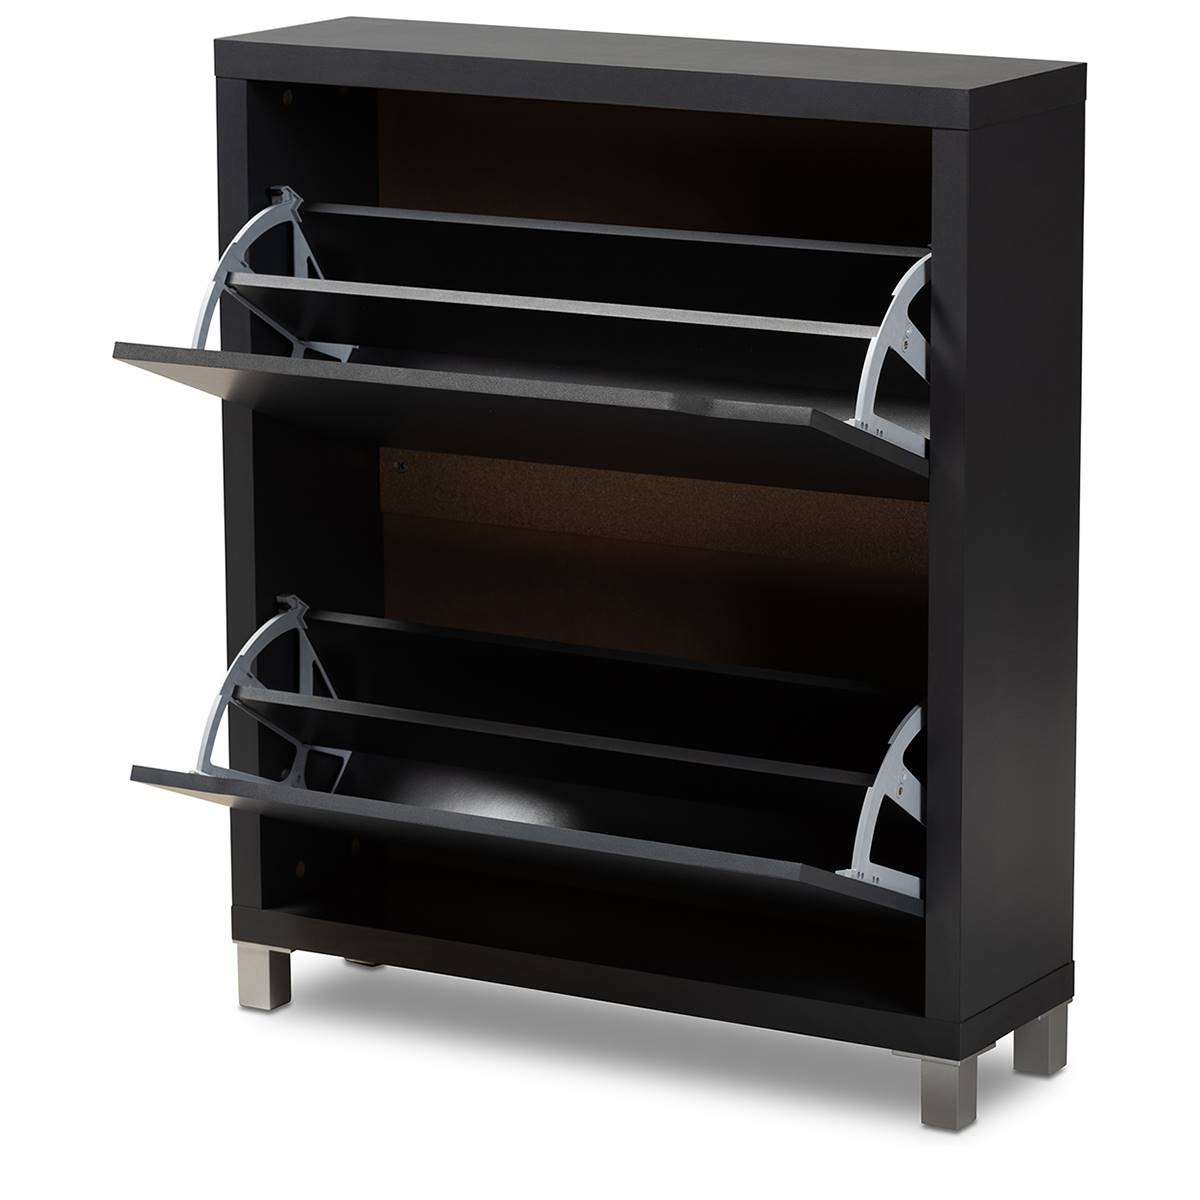 Baxton Studio Simms Shoe Storage Cabinet With 4 Fold Out Racks